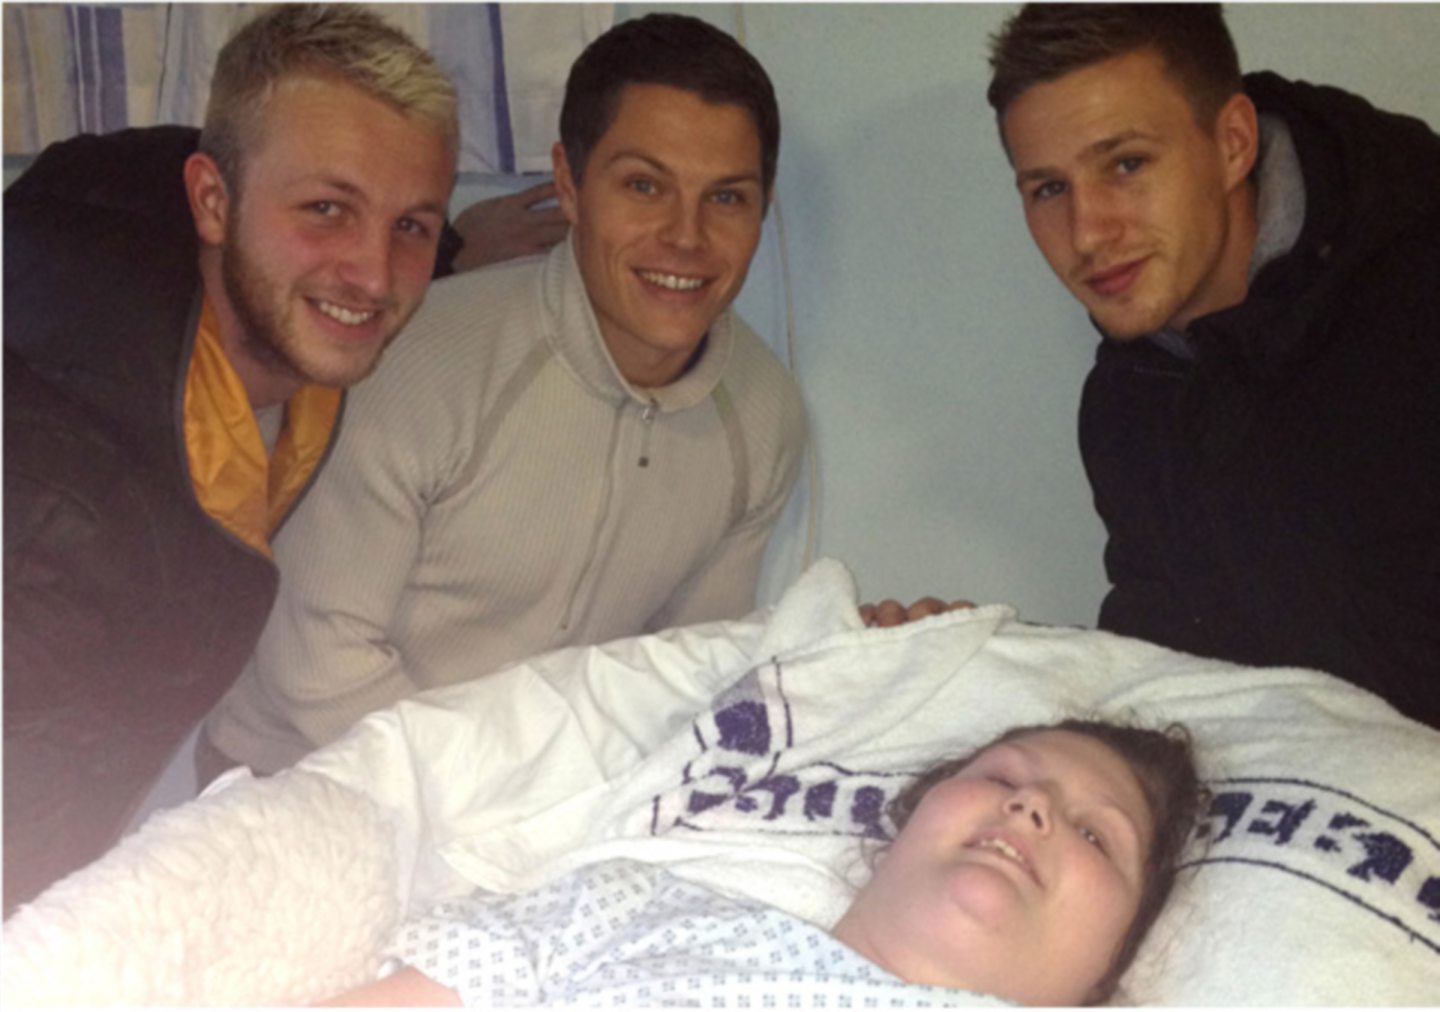 Heather Hird with Dundee United players who had visited her in hospital in 2016.